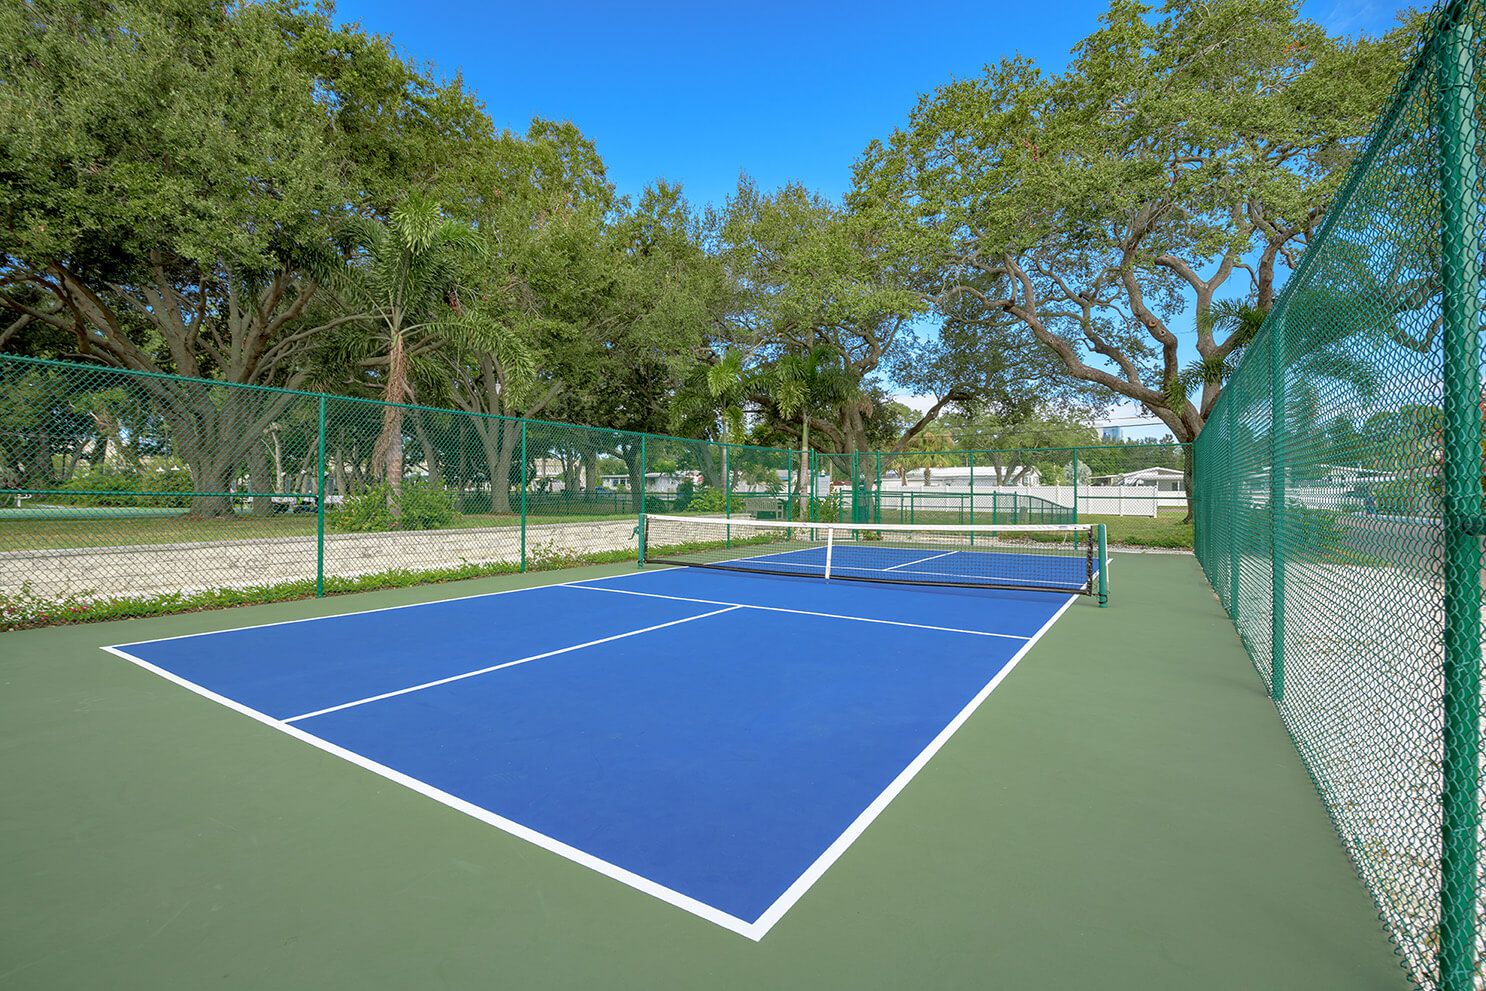 Enclosed outdoor pickleball court with blue playing surface and green fencing in a park-like setting.